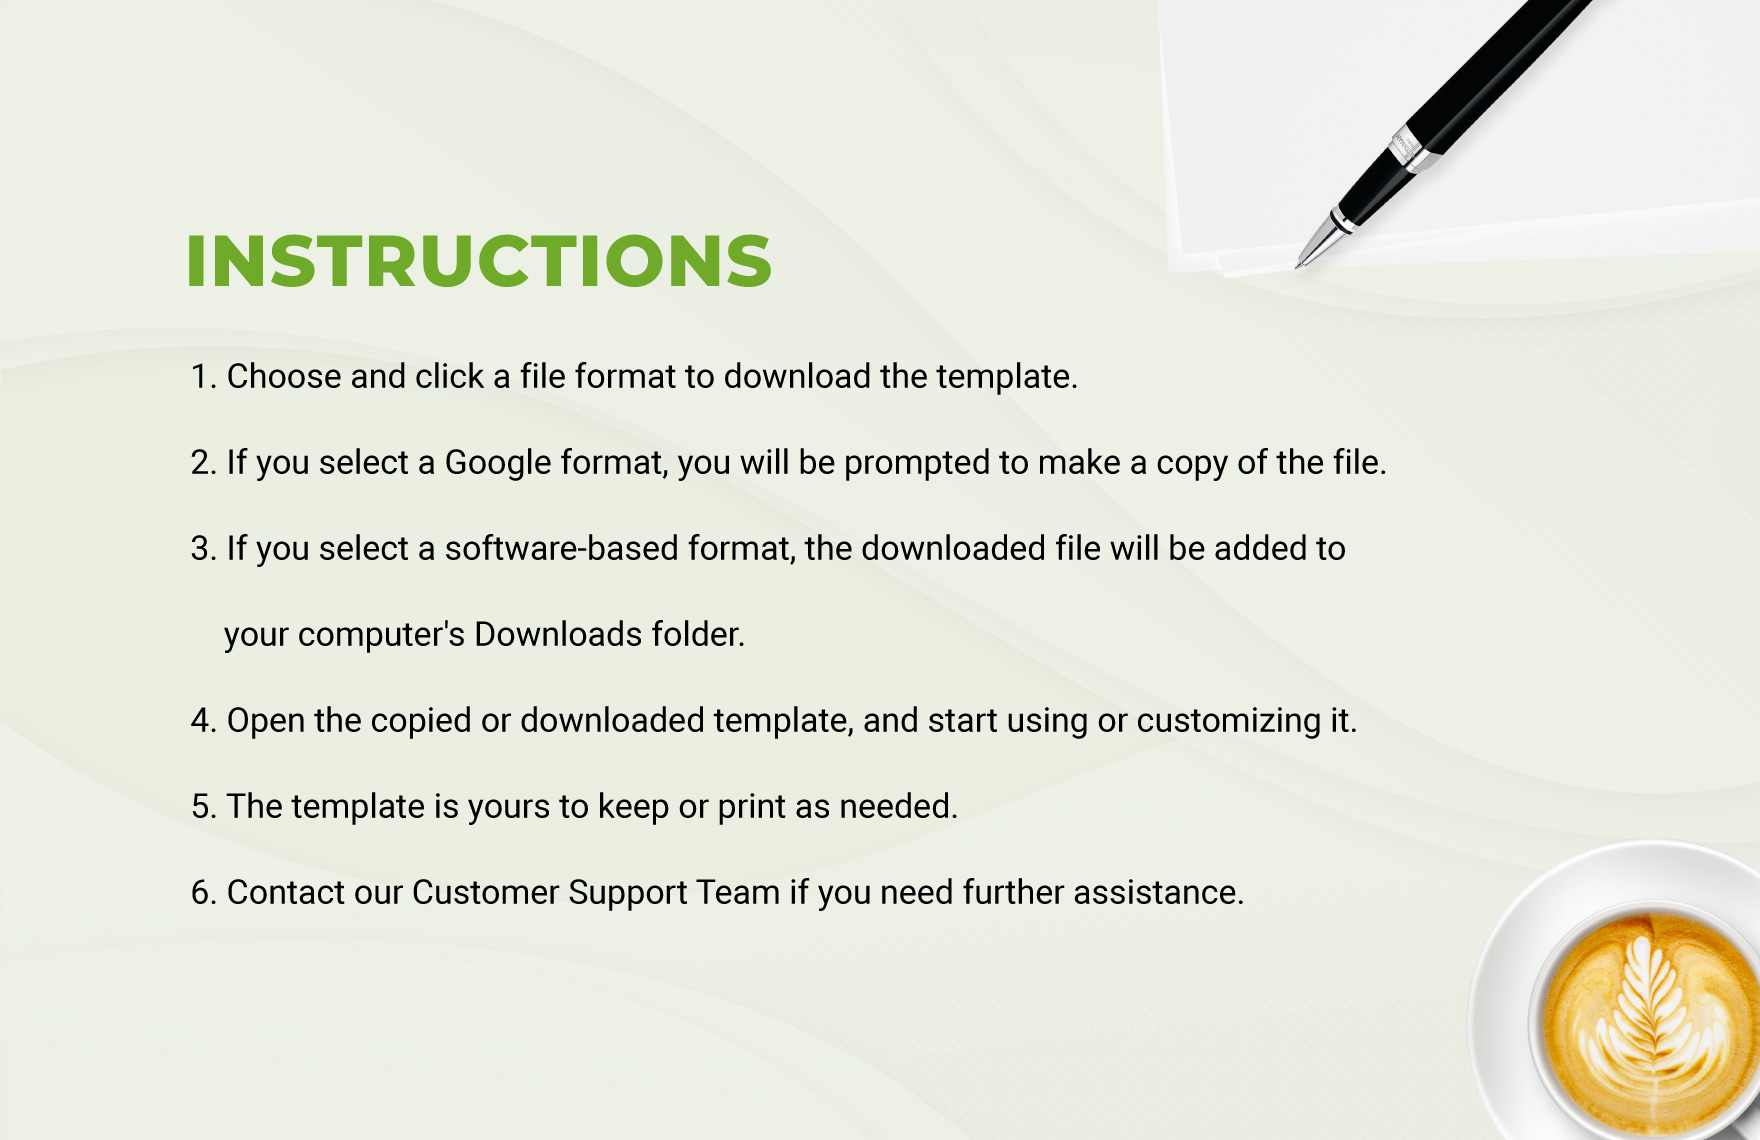 Delivery Note Example Template